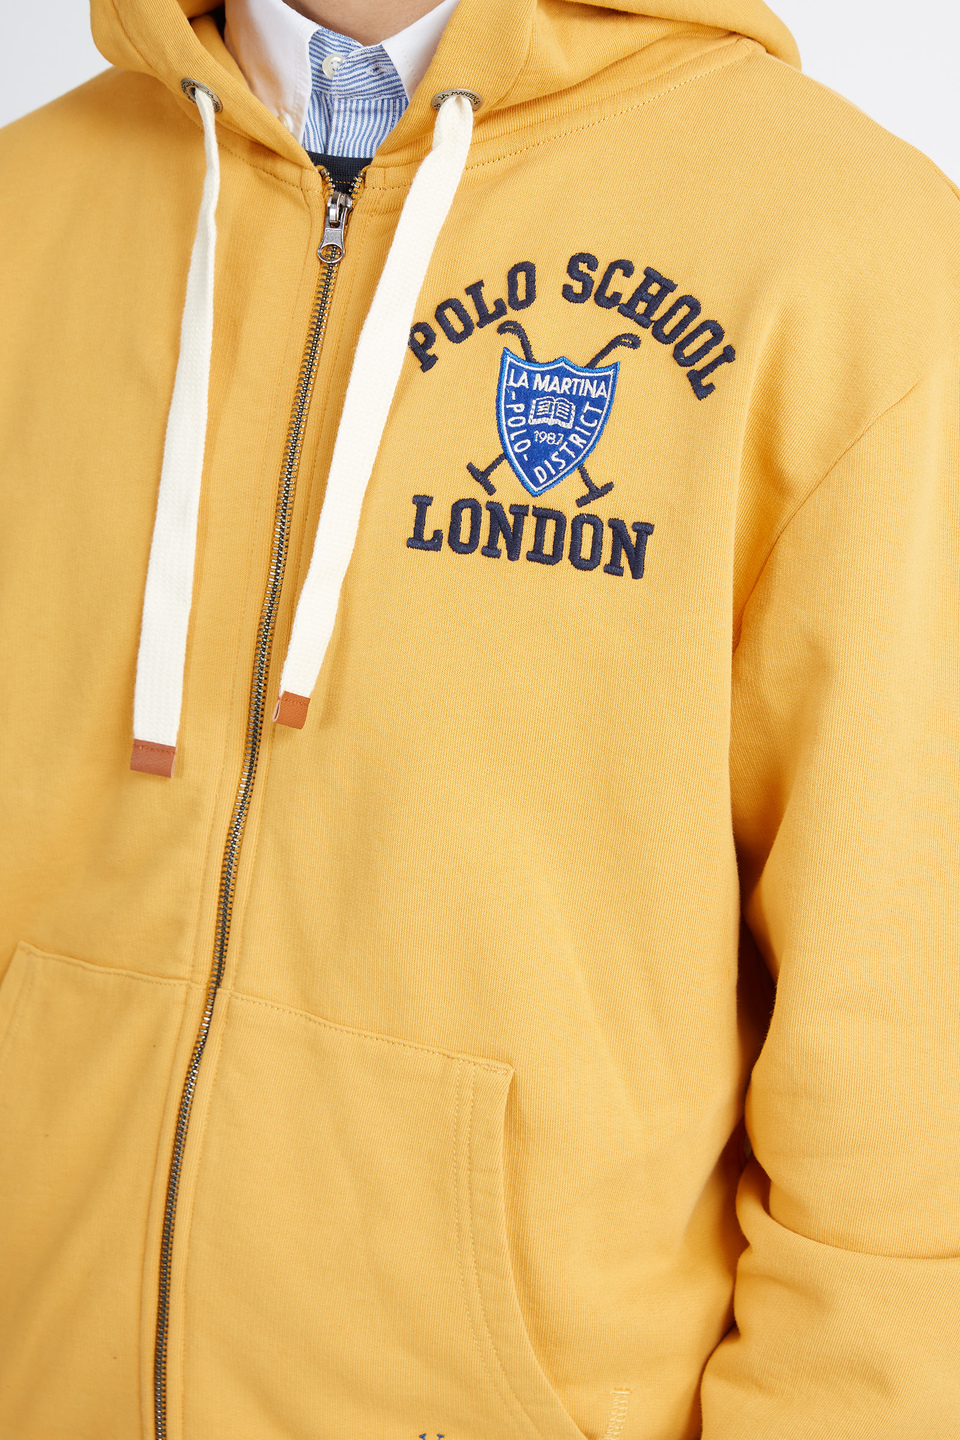 Polo Academy men's full zip hooded sweatshirt in solid color with small logo - Valoris | La Martina - Official Online Shop